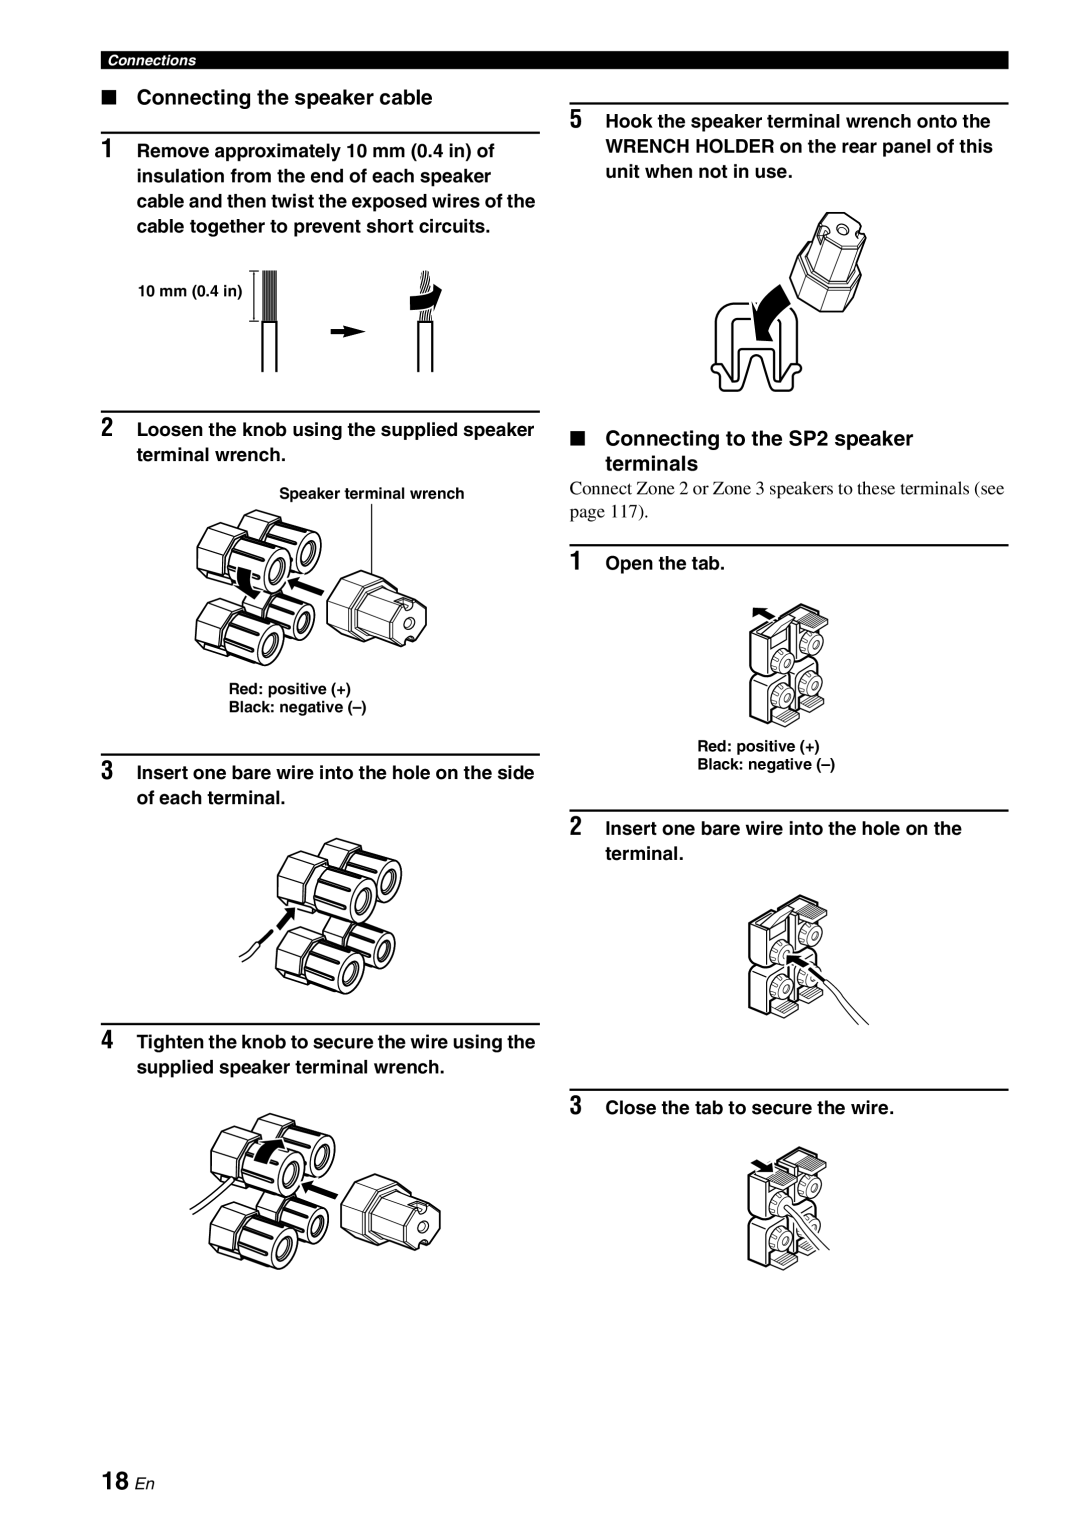 Yamaha RX-V3800 owner manual 18 En, Connecting the speaker cable, Connecting to the SP2 speaker terminals, Open the tab 